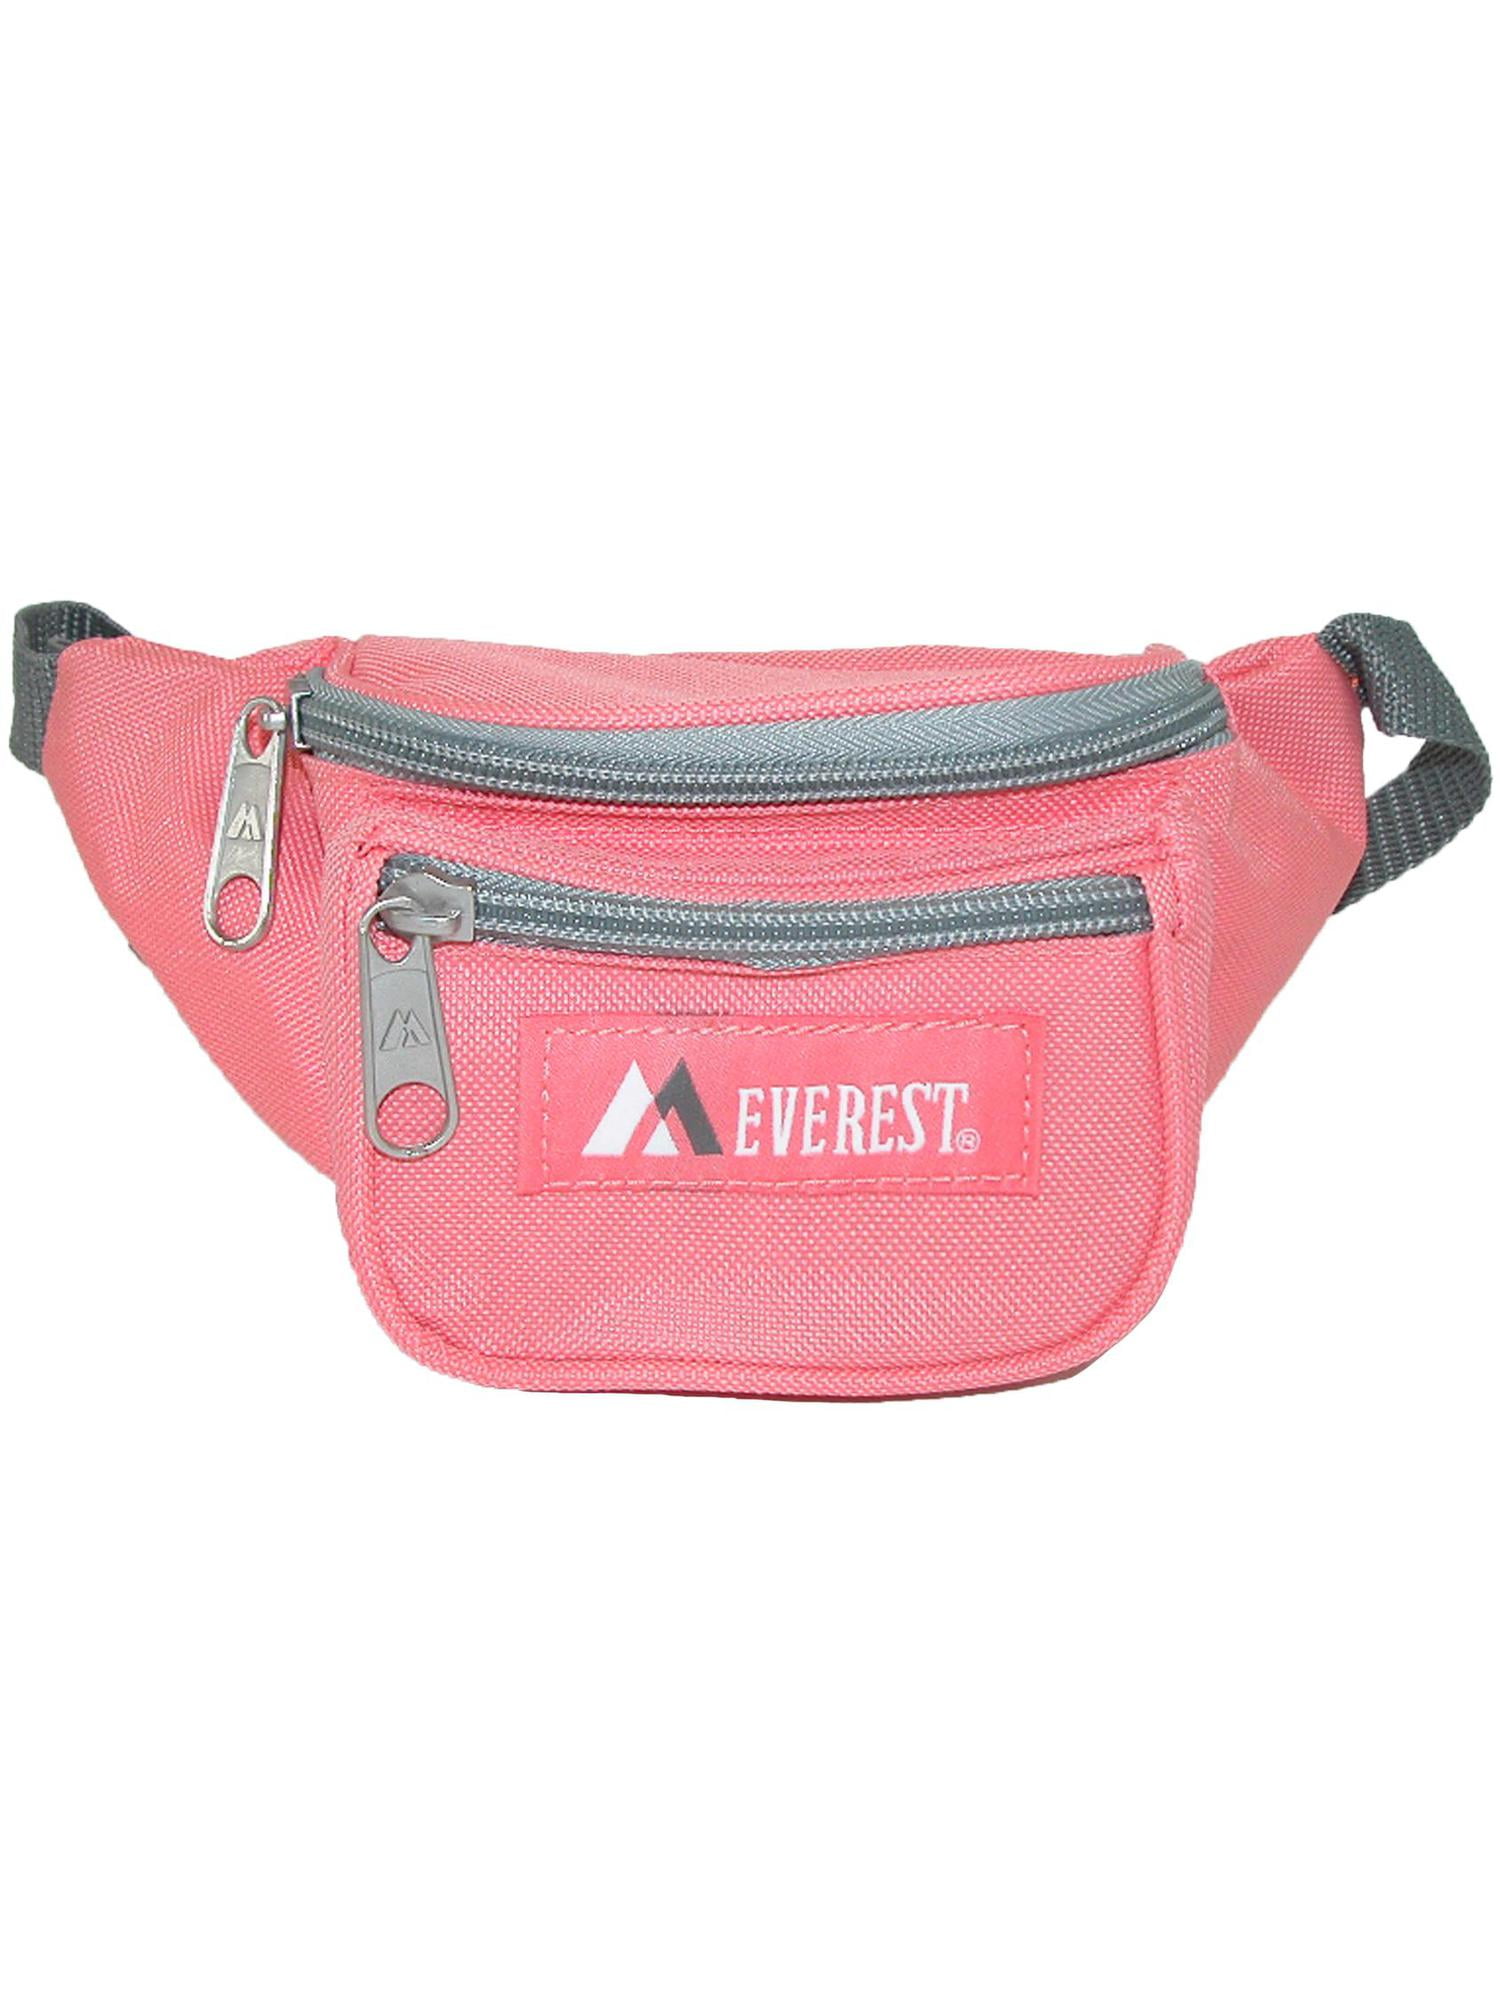 Unicorn Sequin Waist Waist Bag For Women Stylish Kids Fanny Pack For Casual  And Sports Activities Unisex Outdoor Paillette Waist Bag For Women From  Skyson, $10.06 | DHgate.Com